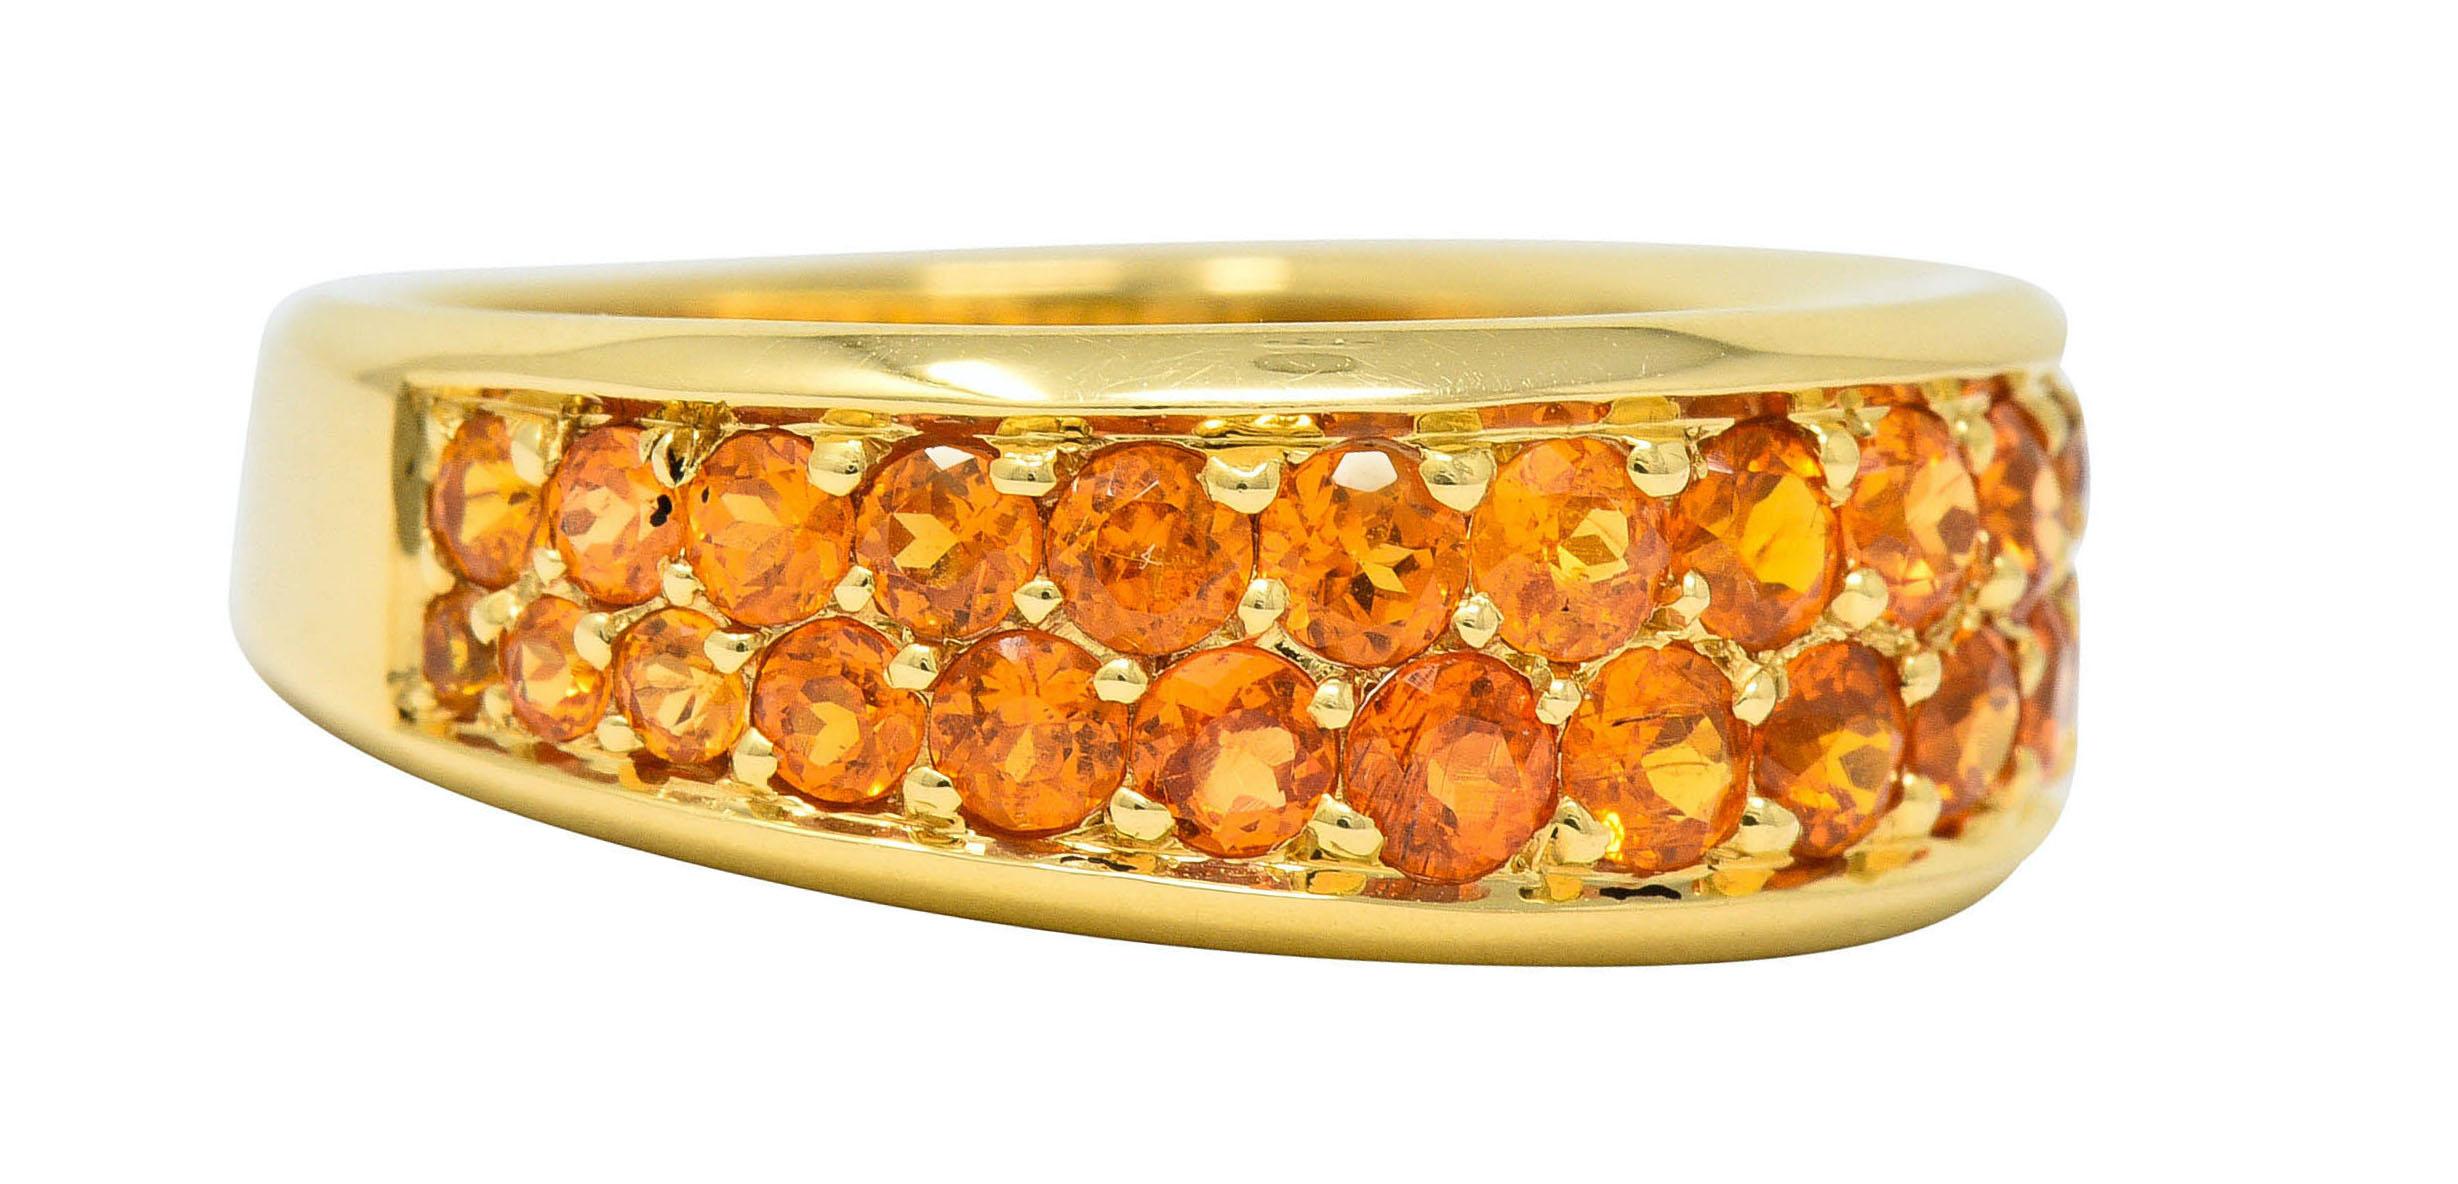 Wide band ring pavé set to front with orange sapphires, graduating in size

Very well-matched vibrant orange in color and weigh approximately 1.95 carat total

Numbered, fully signed Mauboussin Paris, and with maker's mark

Stamped 750 and with